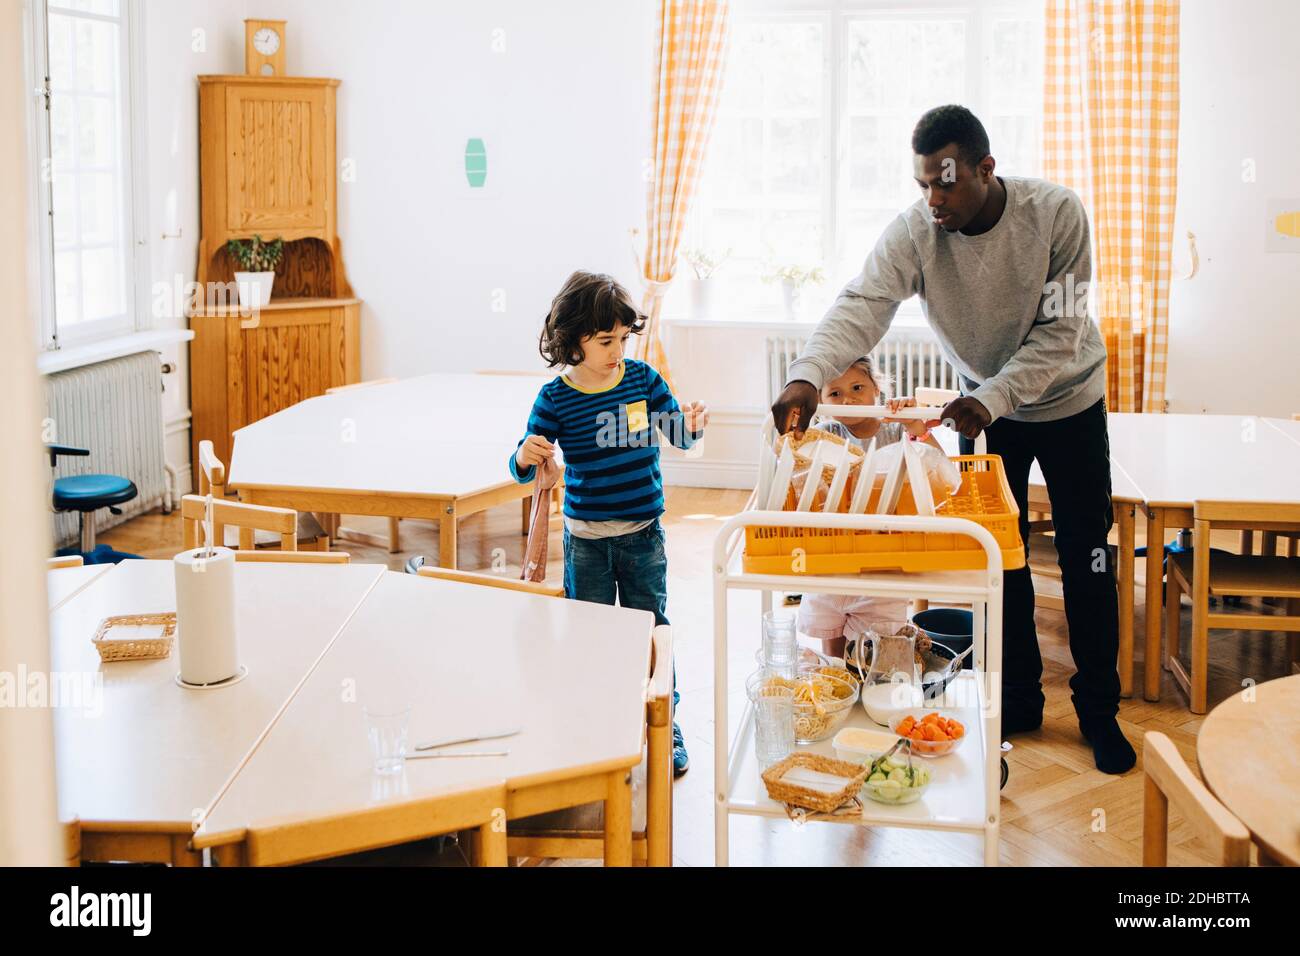 Male teacher assisting students pushing cart amidst tables in classroom at child care Stock Photo